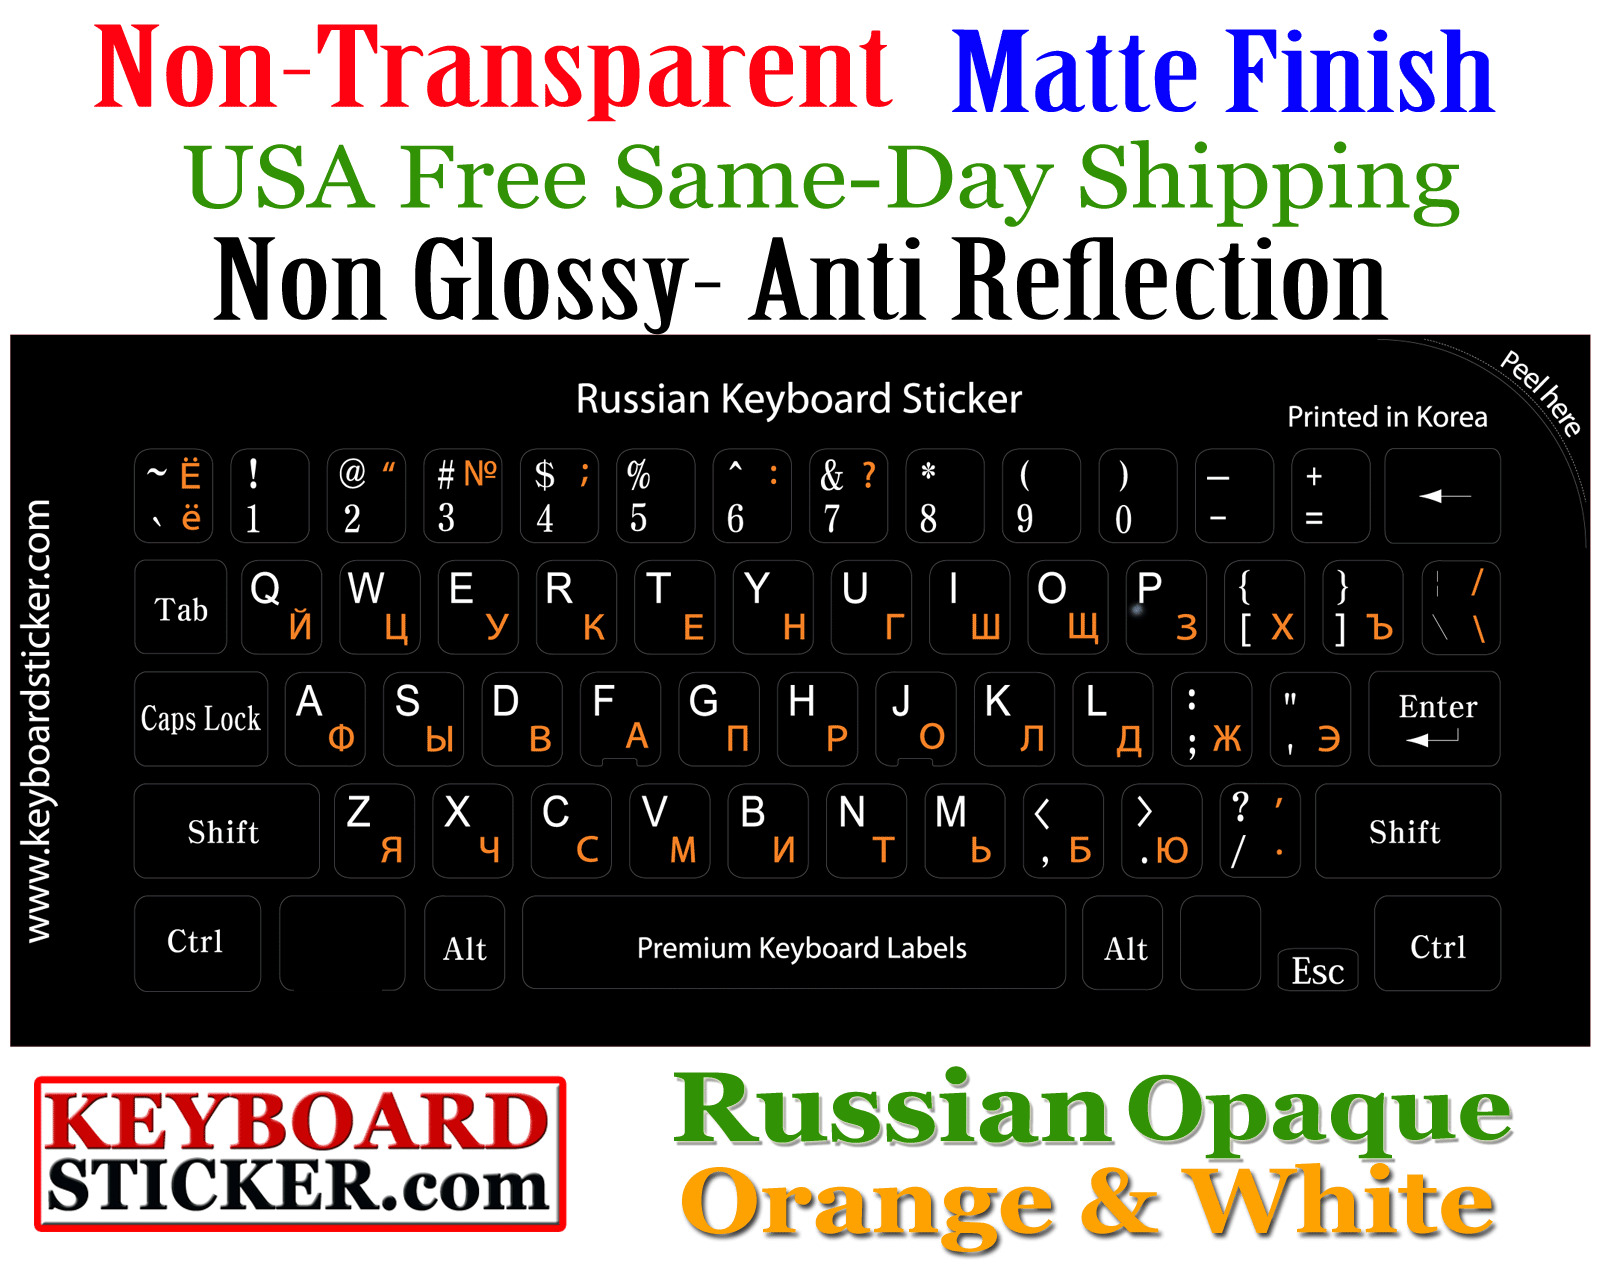 Russian Opaque Keyboard Sticker. Non Transparent. Best Quality guaranteed